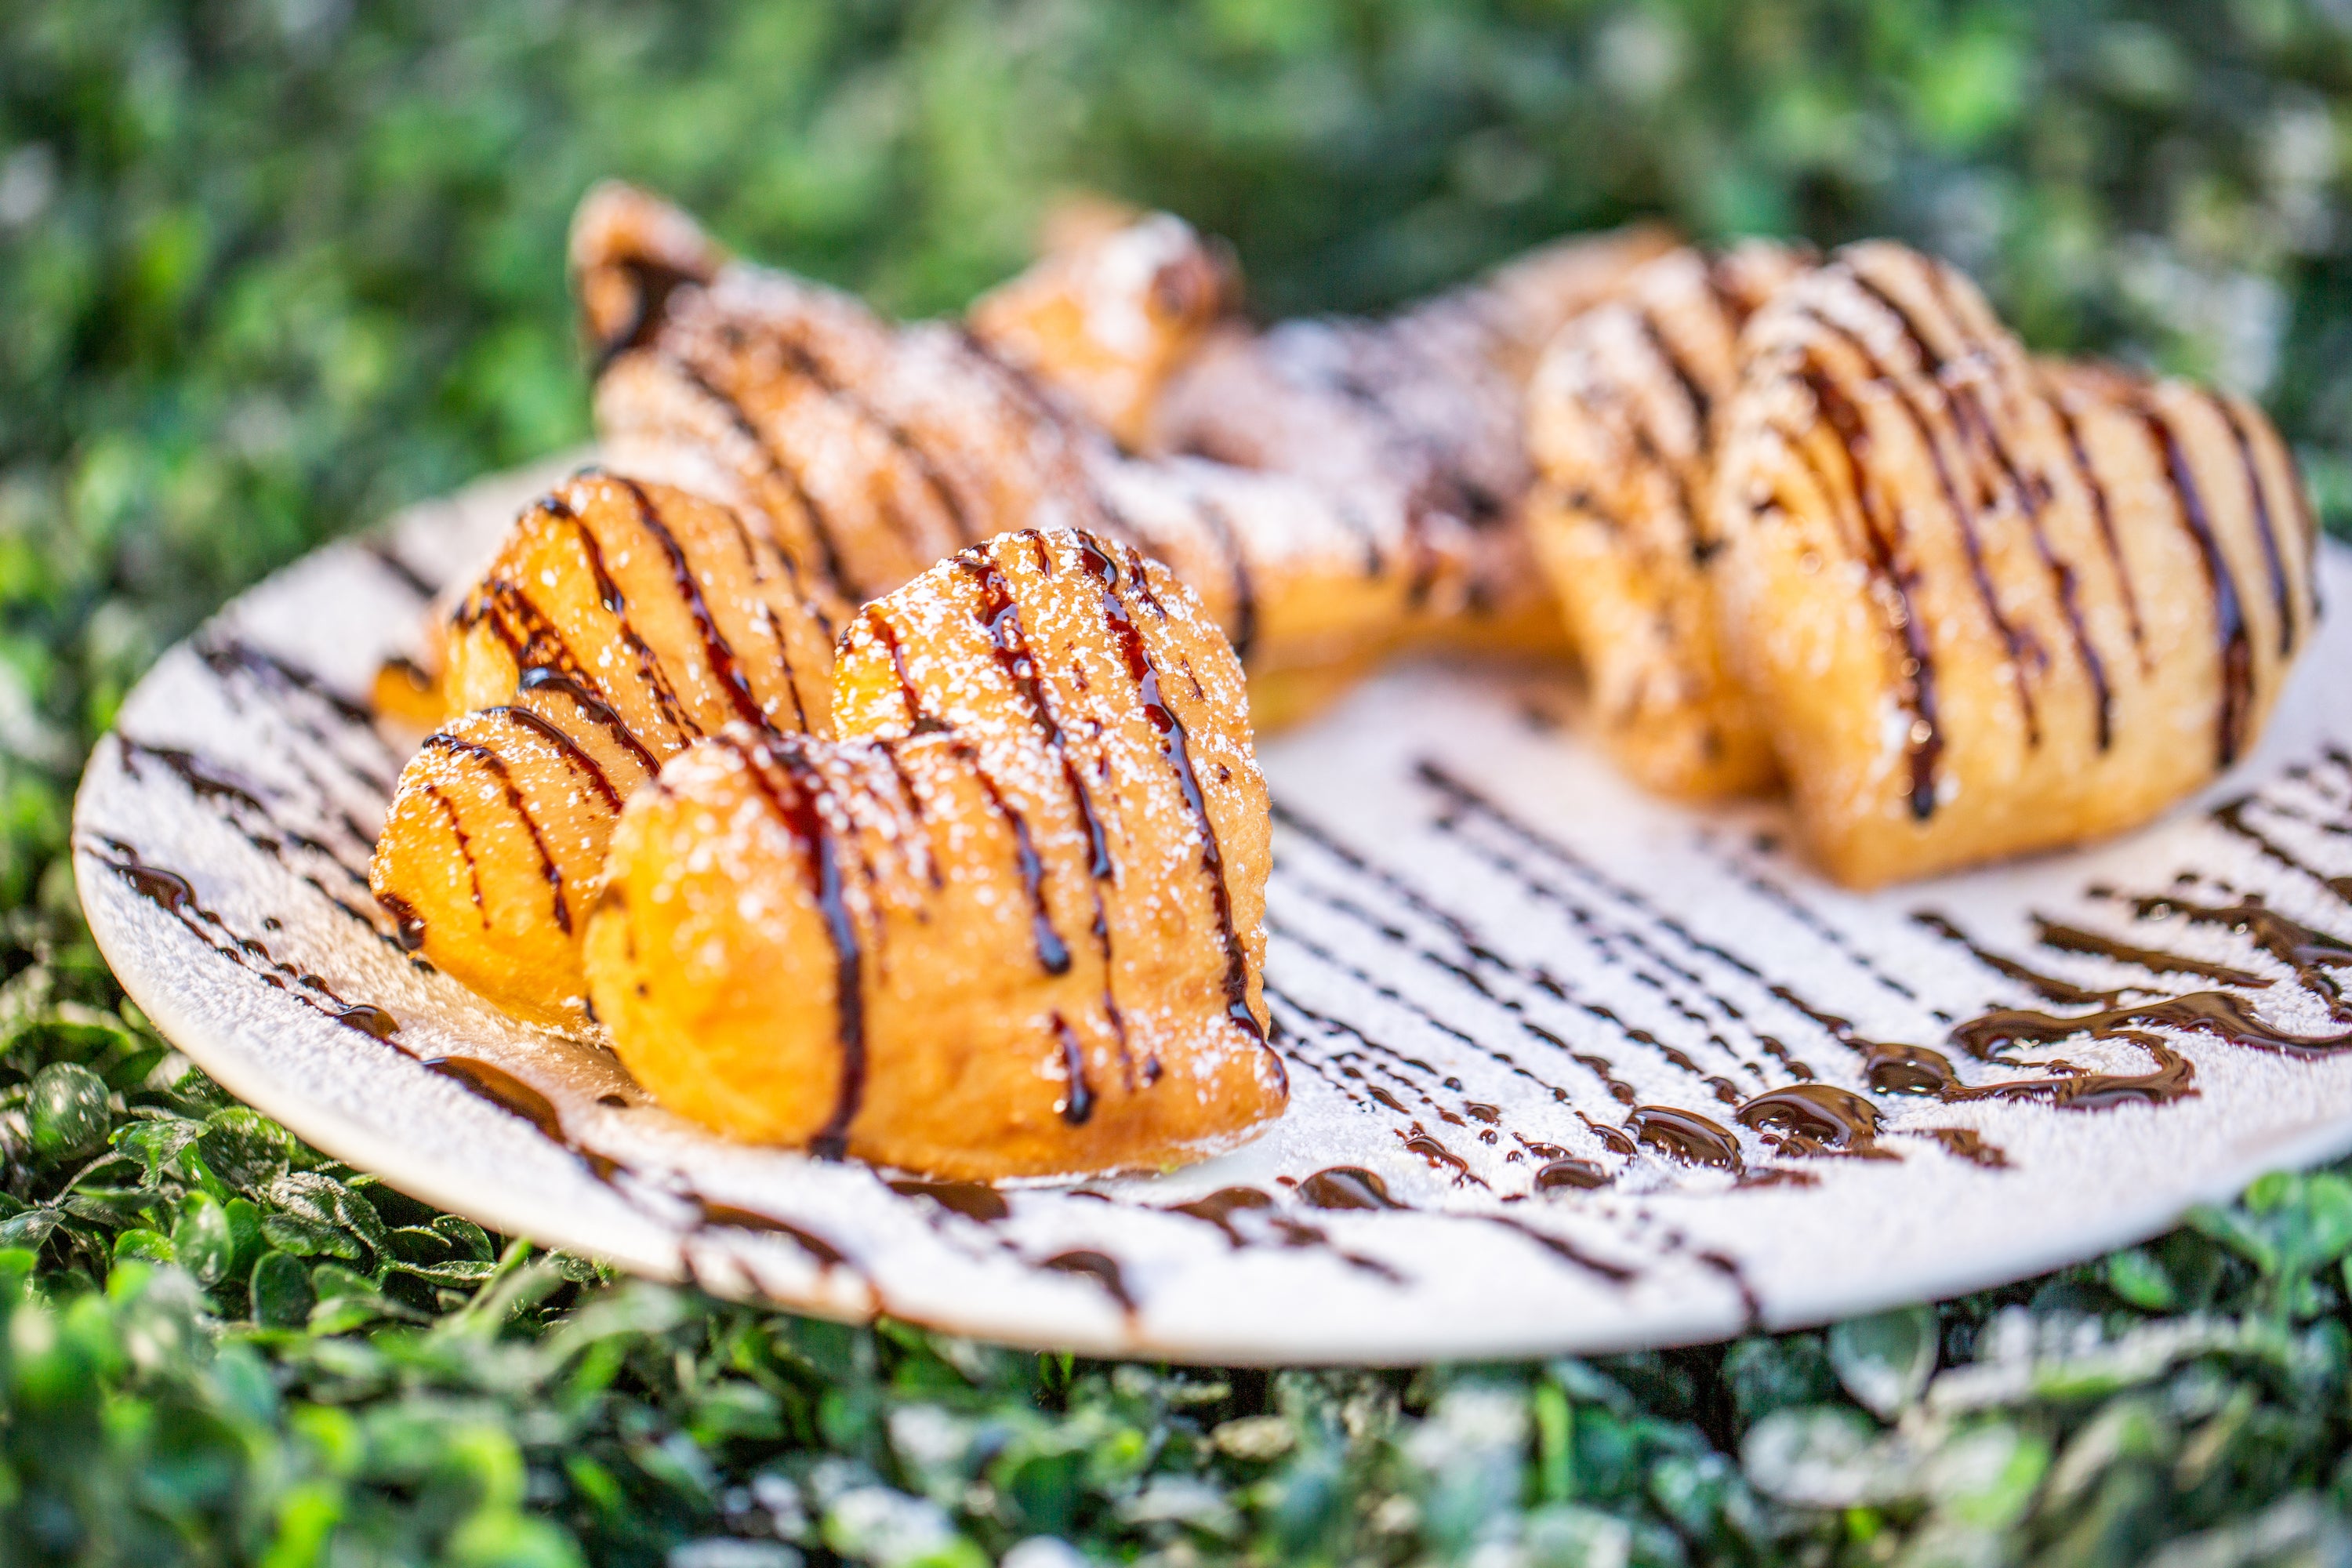 Chocolate Drizzle Beignets